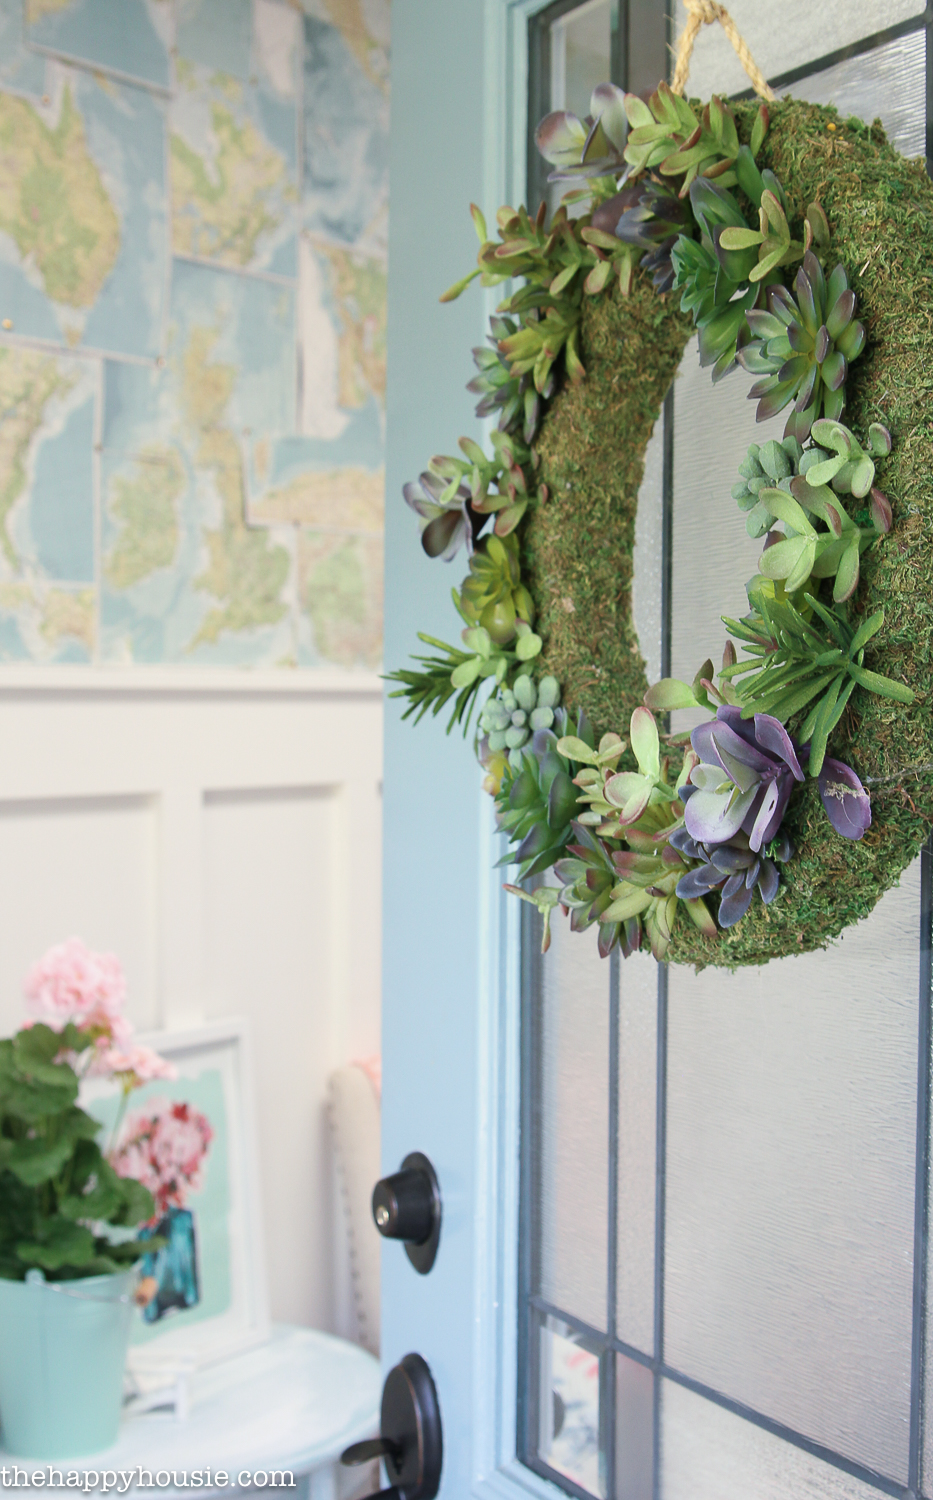 A green wreath with succulents is on the front door.